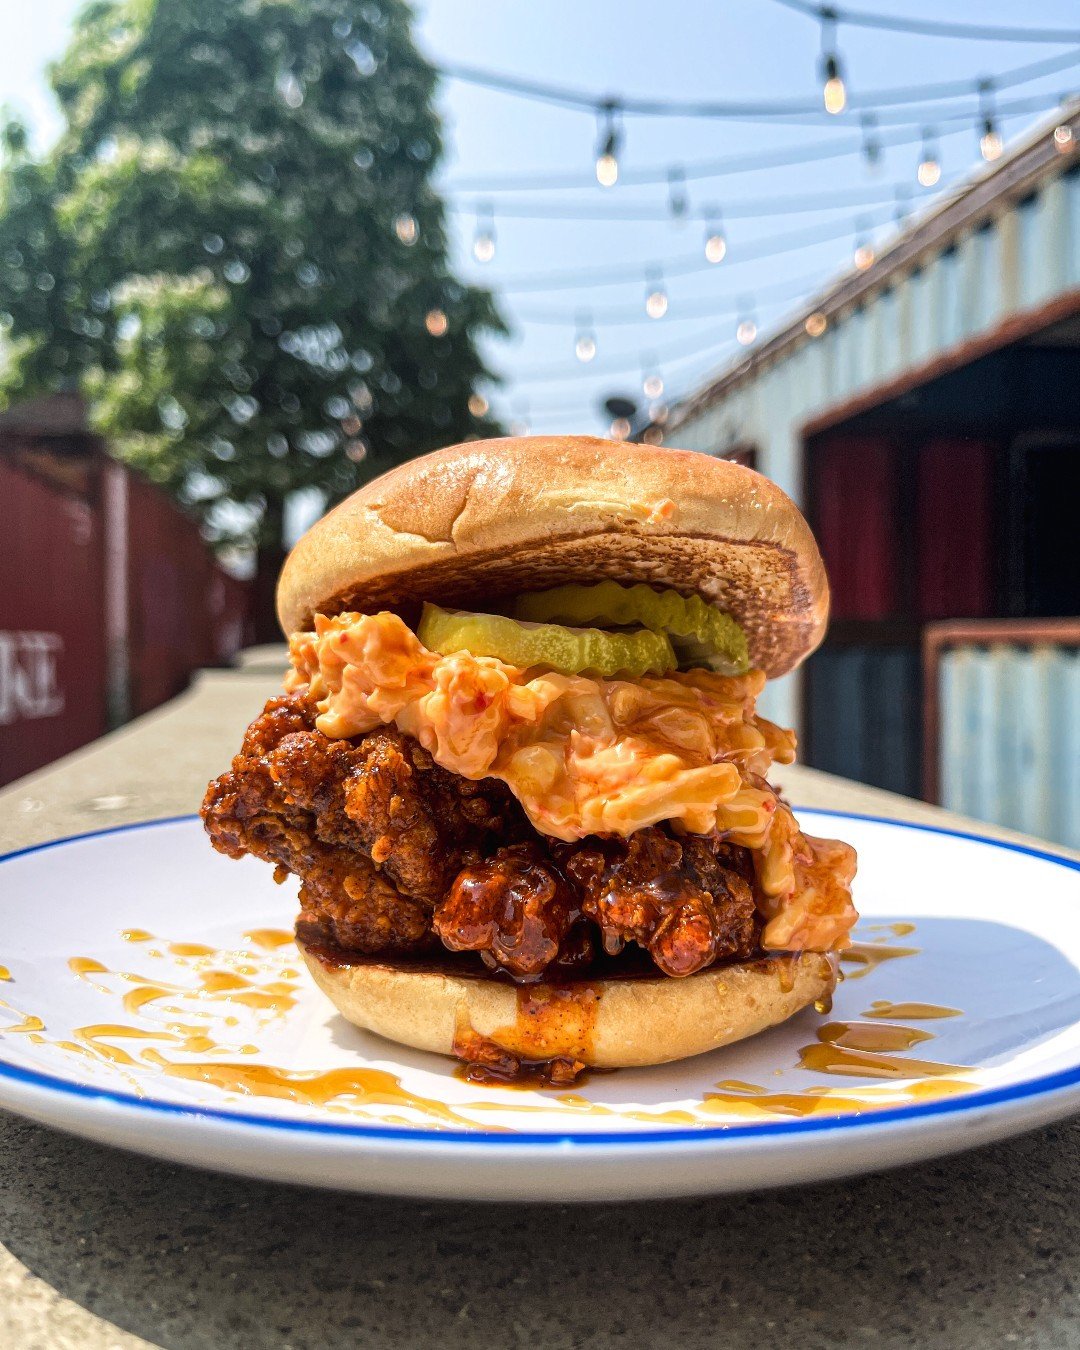 Hot Honey and Pimento Cheese is back for your post-Derby days. 

Enjoy our freshly fried chicken breast topped with a healthy portion of pimento cheese and hot honey. Choose your heat level, or none at all and enjoy!